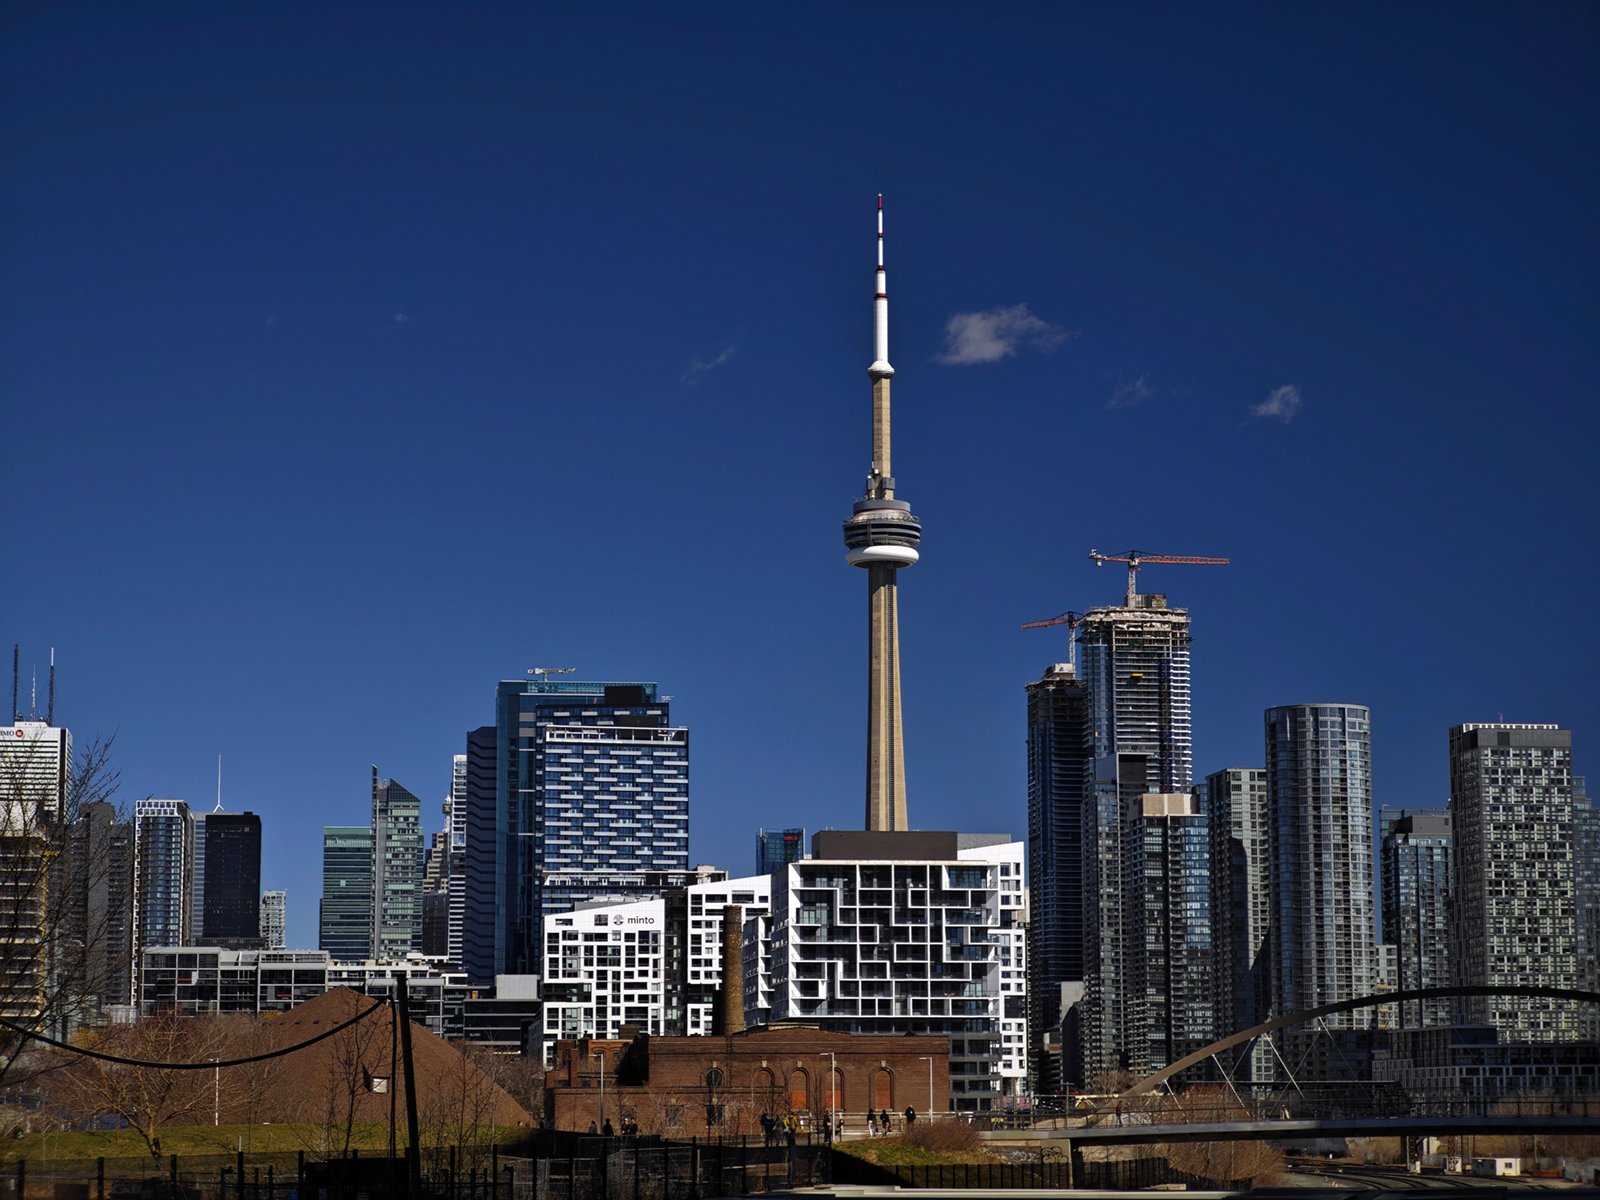 A panoramic view of toronto showcasing the cn tower amid surrounding skyscrapers under a clear blue sky.